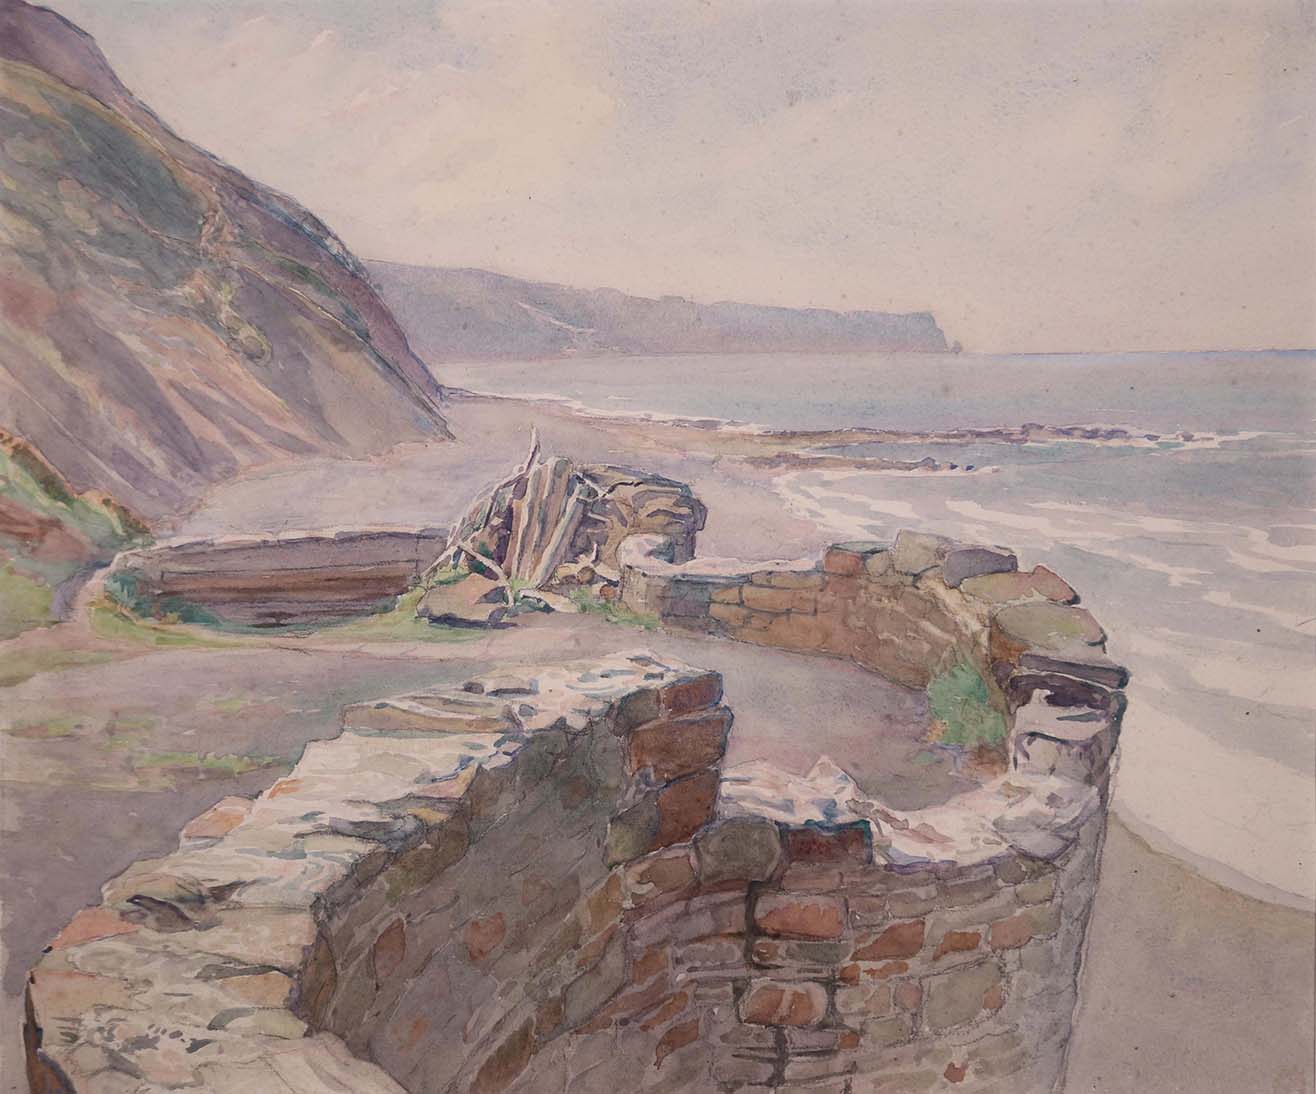 watercolour of a stone wall at the borrom of the cliffs at the shoreline